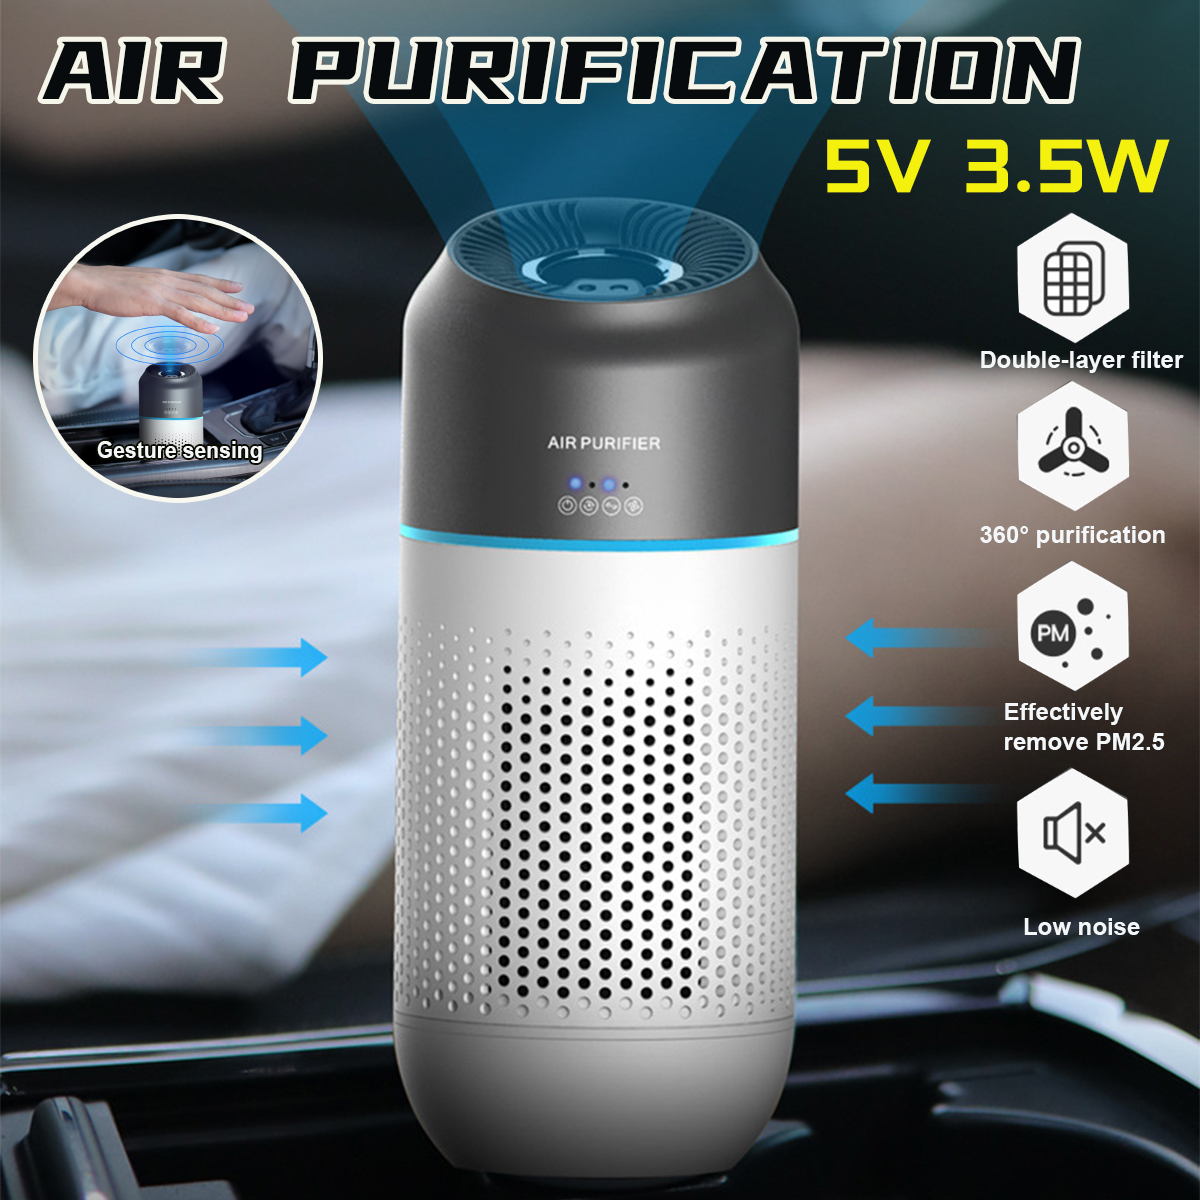 5V-Air-Purifier-2-Gear-Wind-Speed-79msup3h-Remove-PM25-Hand-Gesture-Infrared-Sensor-Low-Noise-for-Ho-1755462-8